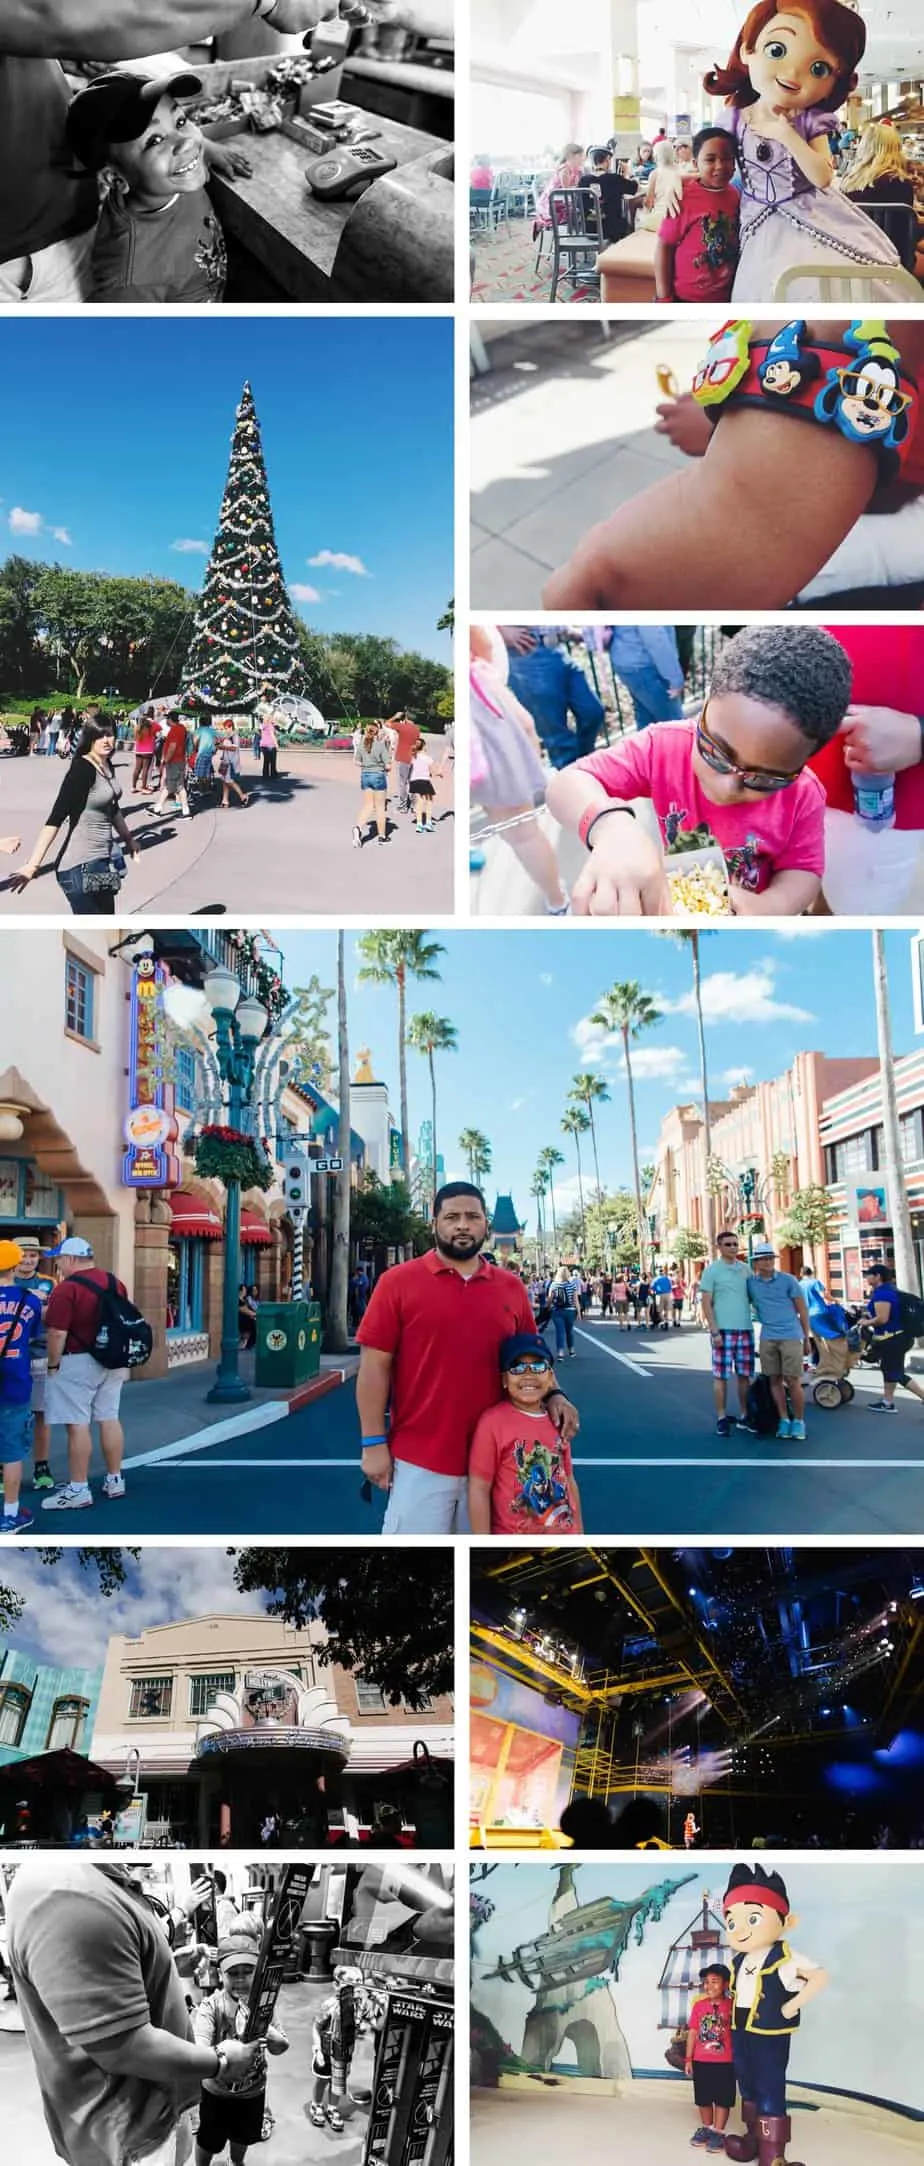 We spent our third day of our family vacation at Disney World at Hollywood Studios.